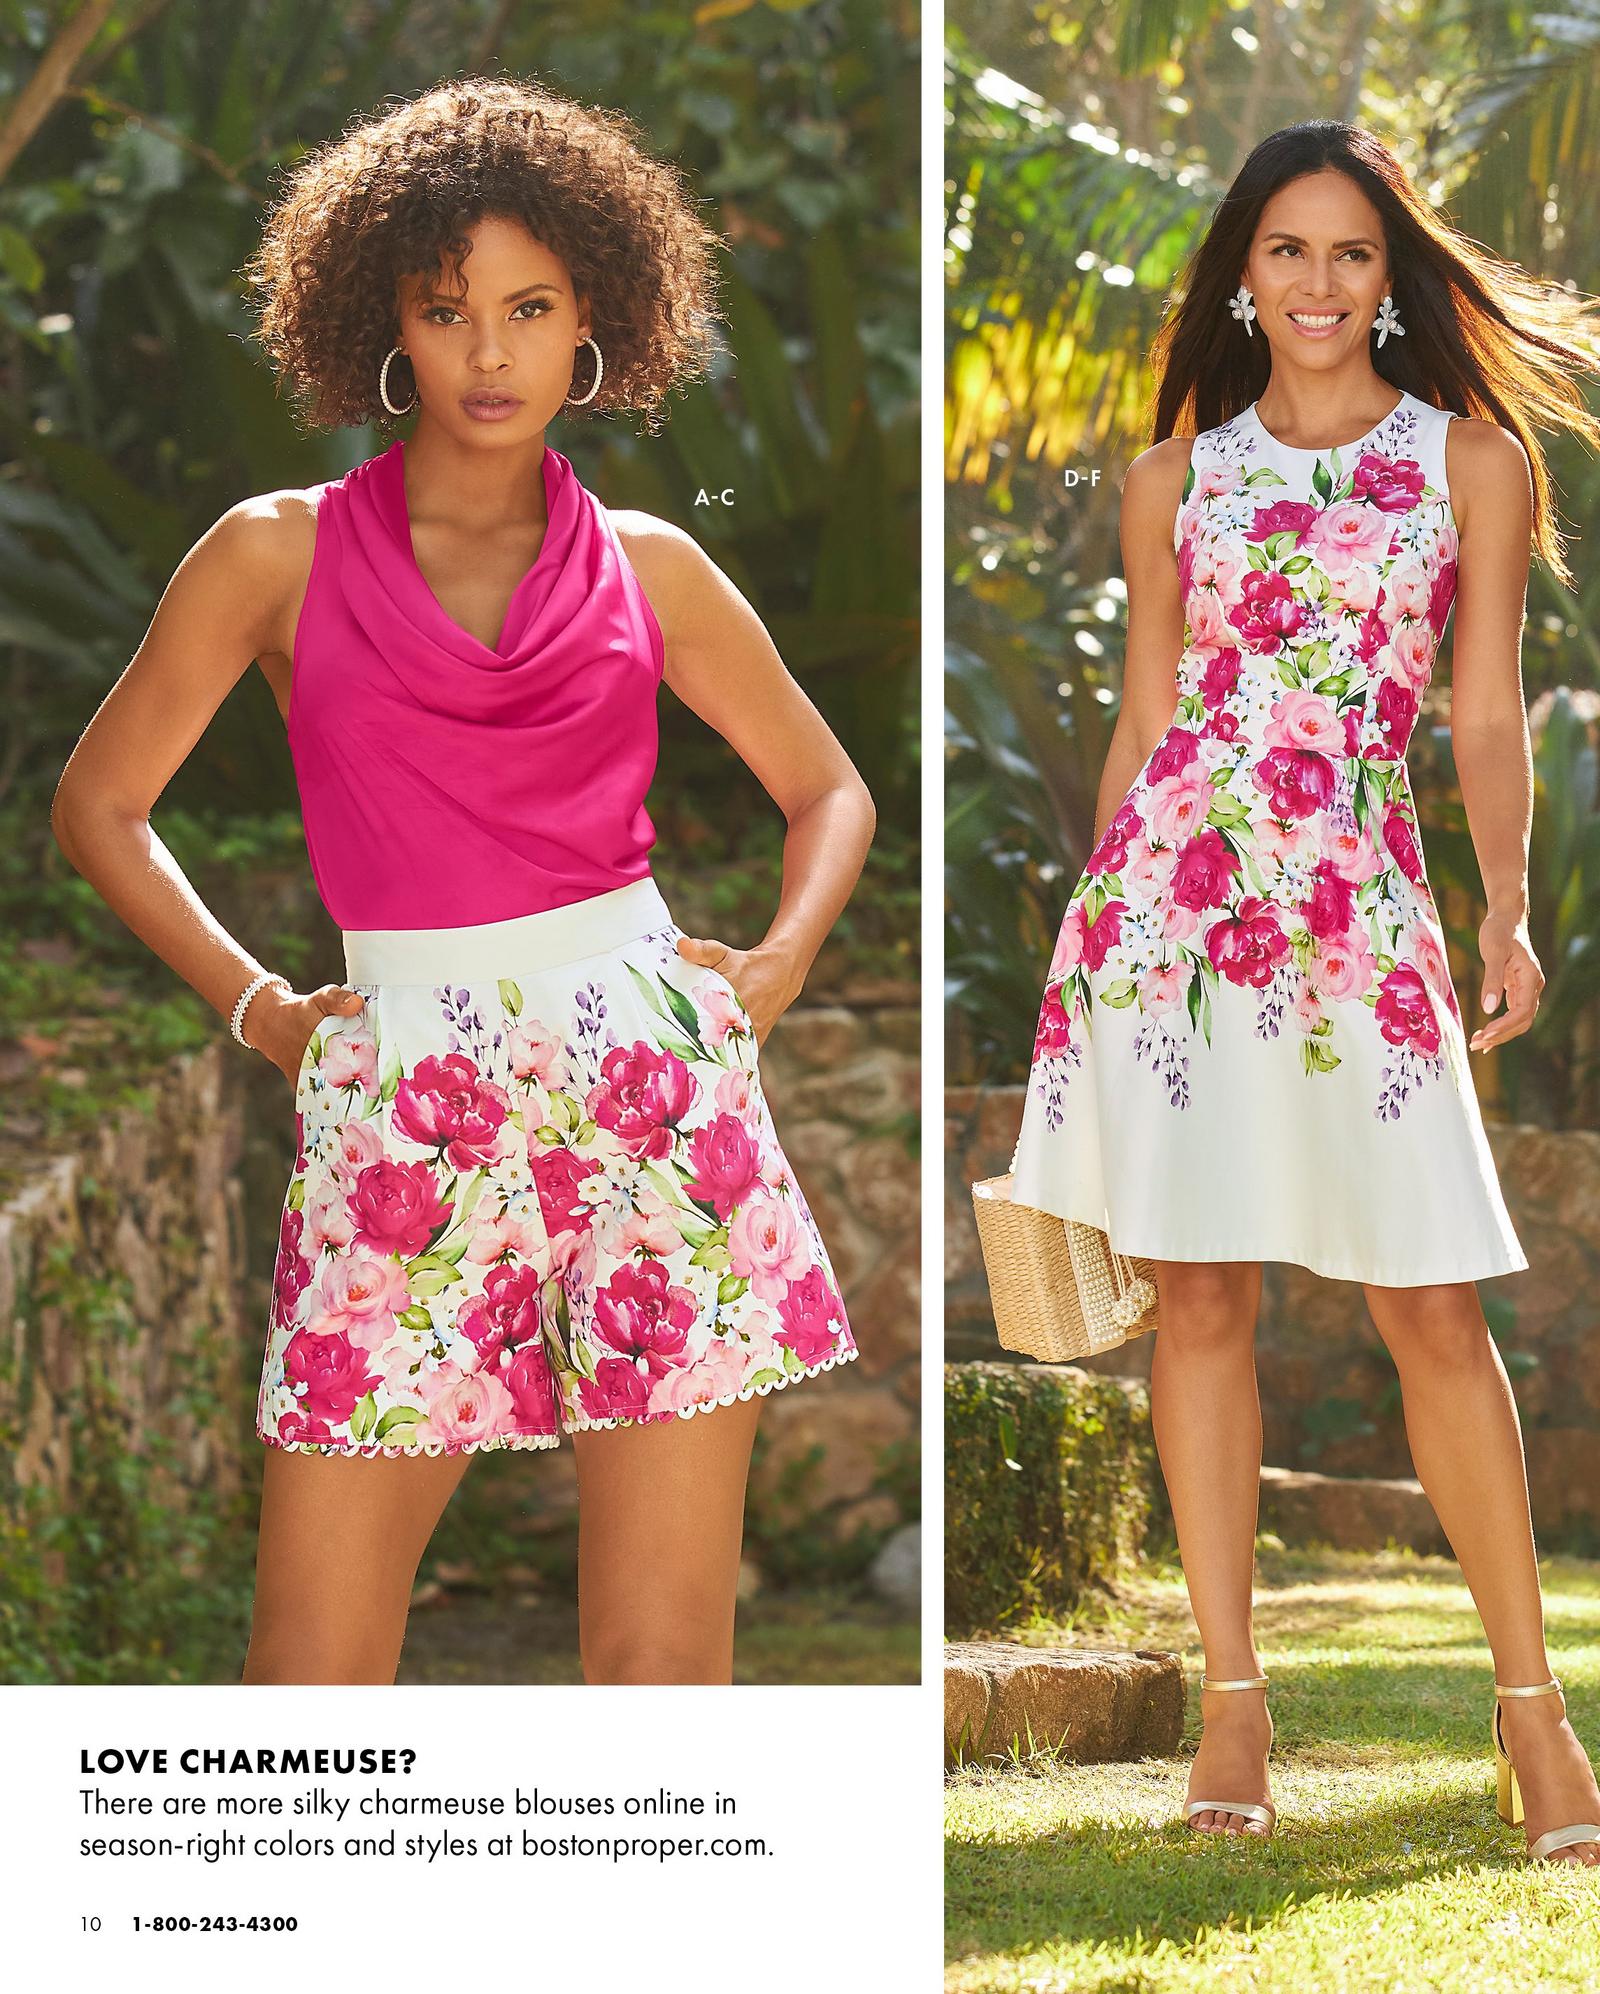 left model wearing a hot pink cowl neck sleeveless charmeuse blouse and floral print high-waisted shorts. right model wearing a floral print sleeveless fit-and-flare dress, white flower earrings, and pearl embellished straw bag.